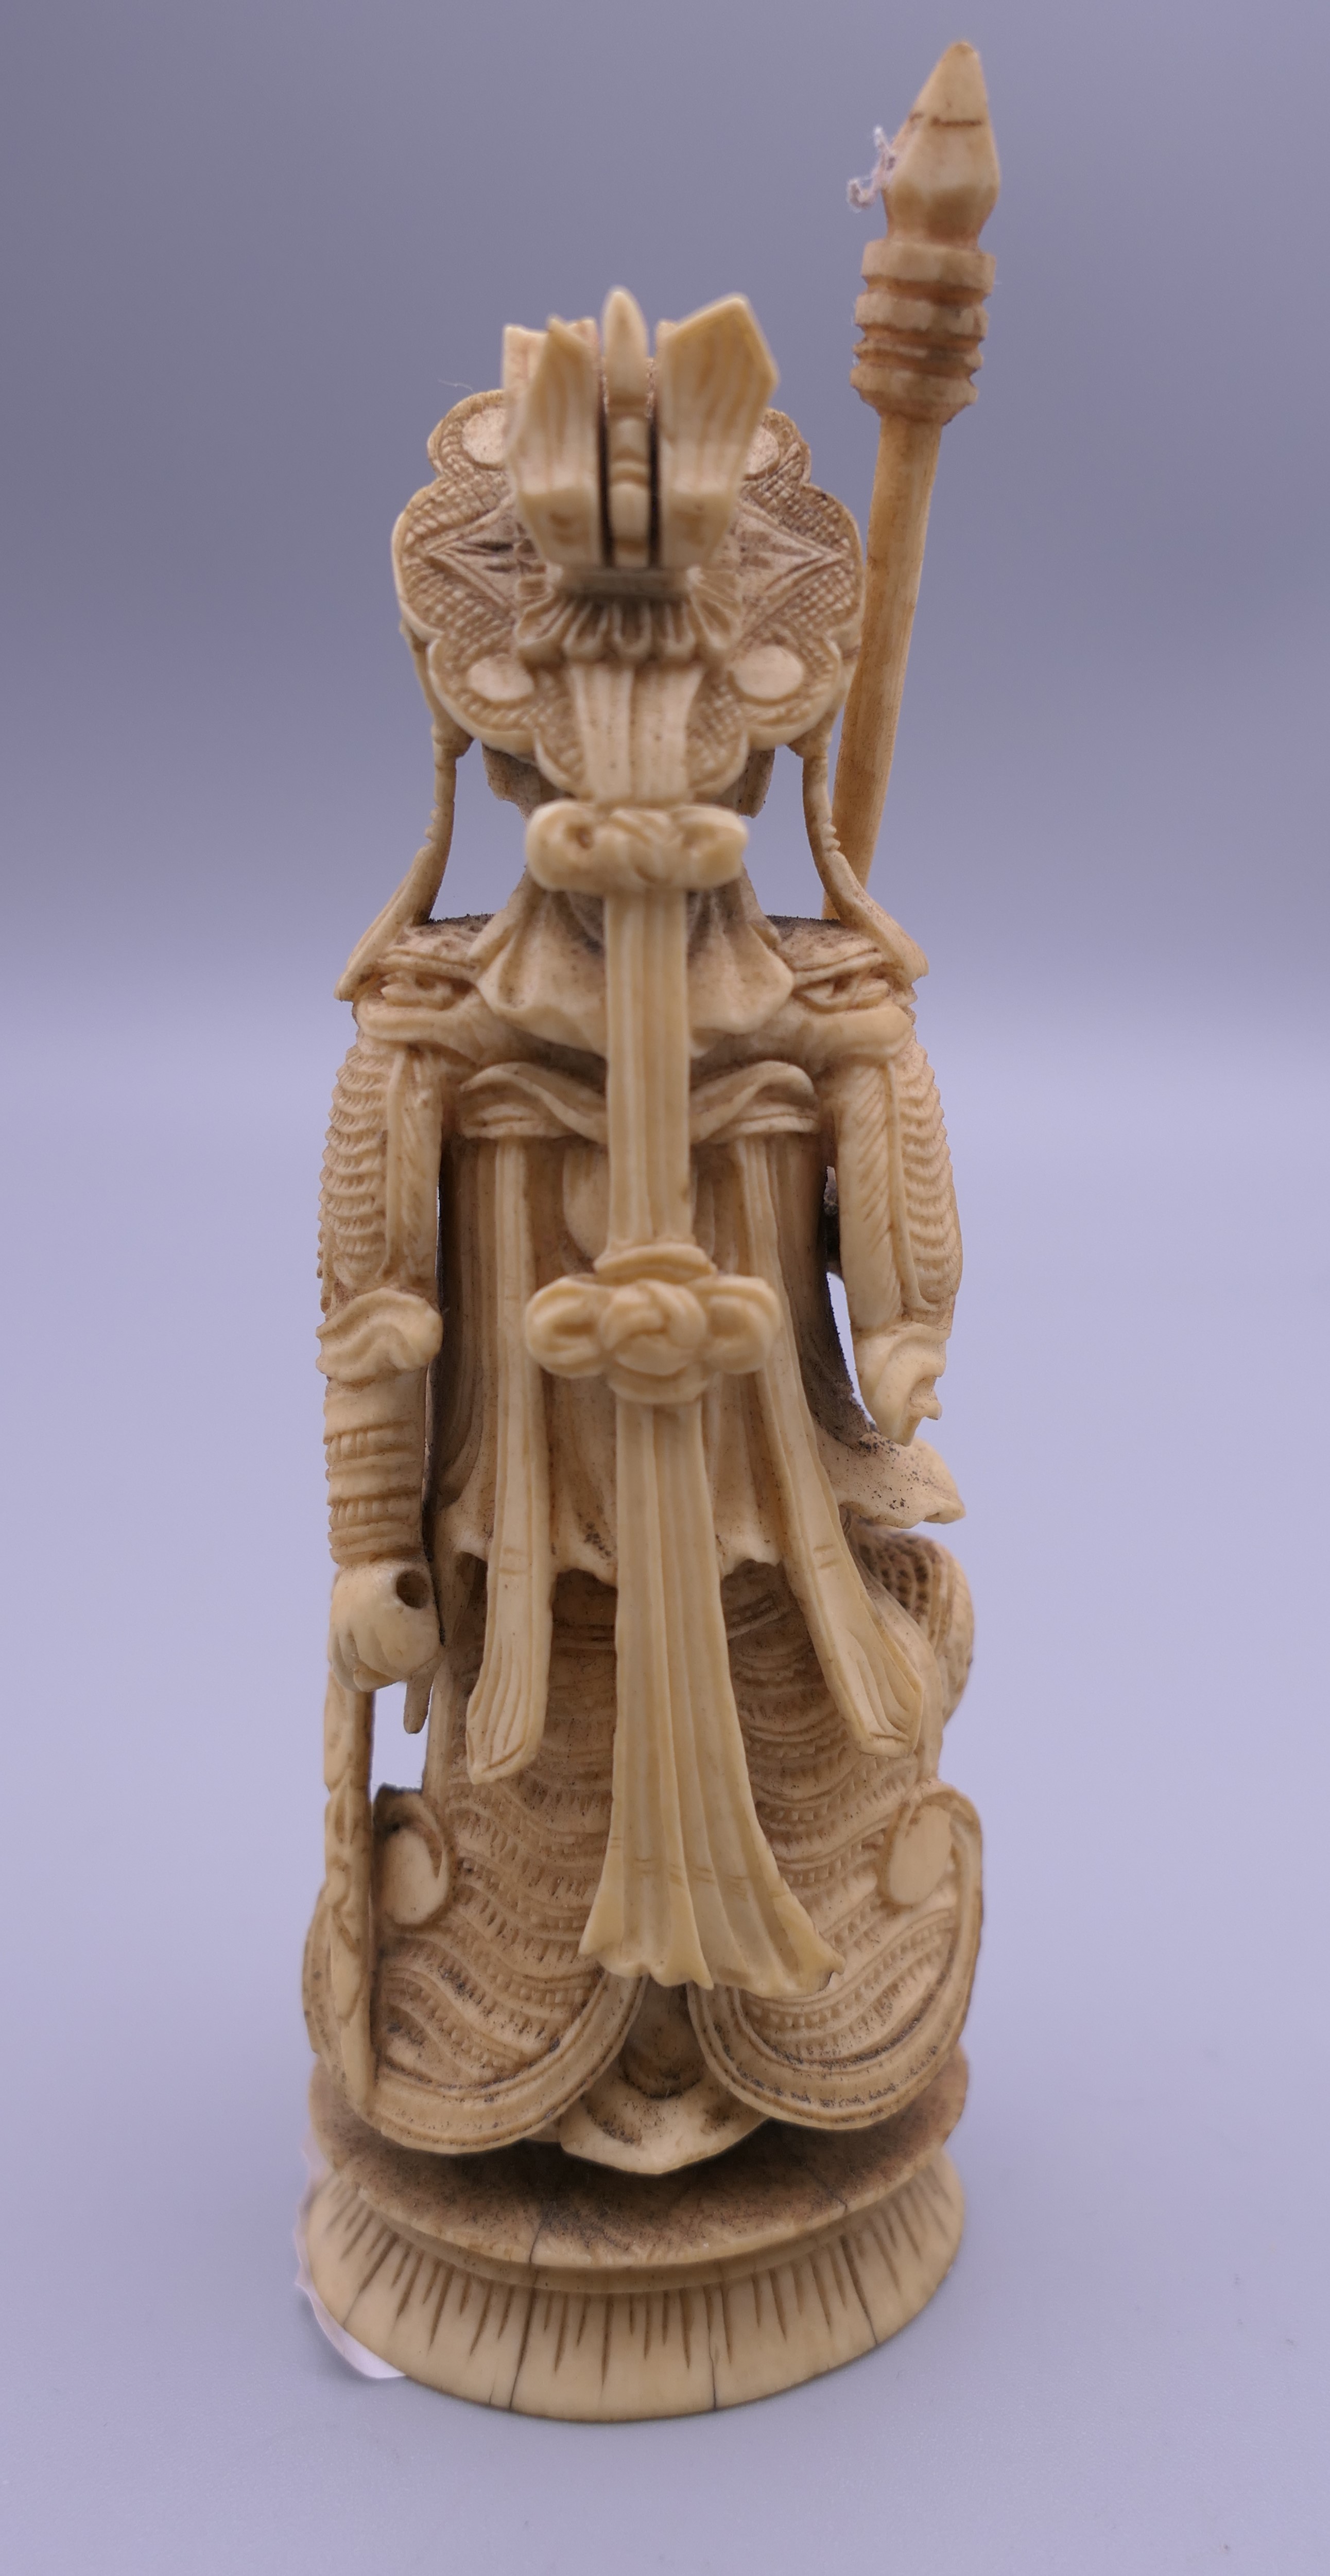 A 19th century Chinese ivory figure, probably a chess piece. 11.5 cm high. - Image 3 of 8